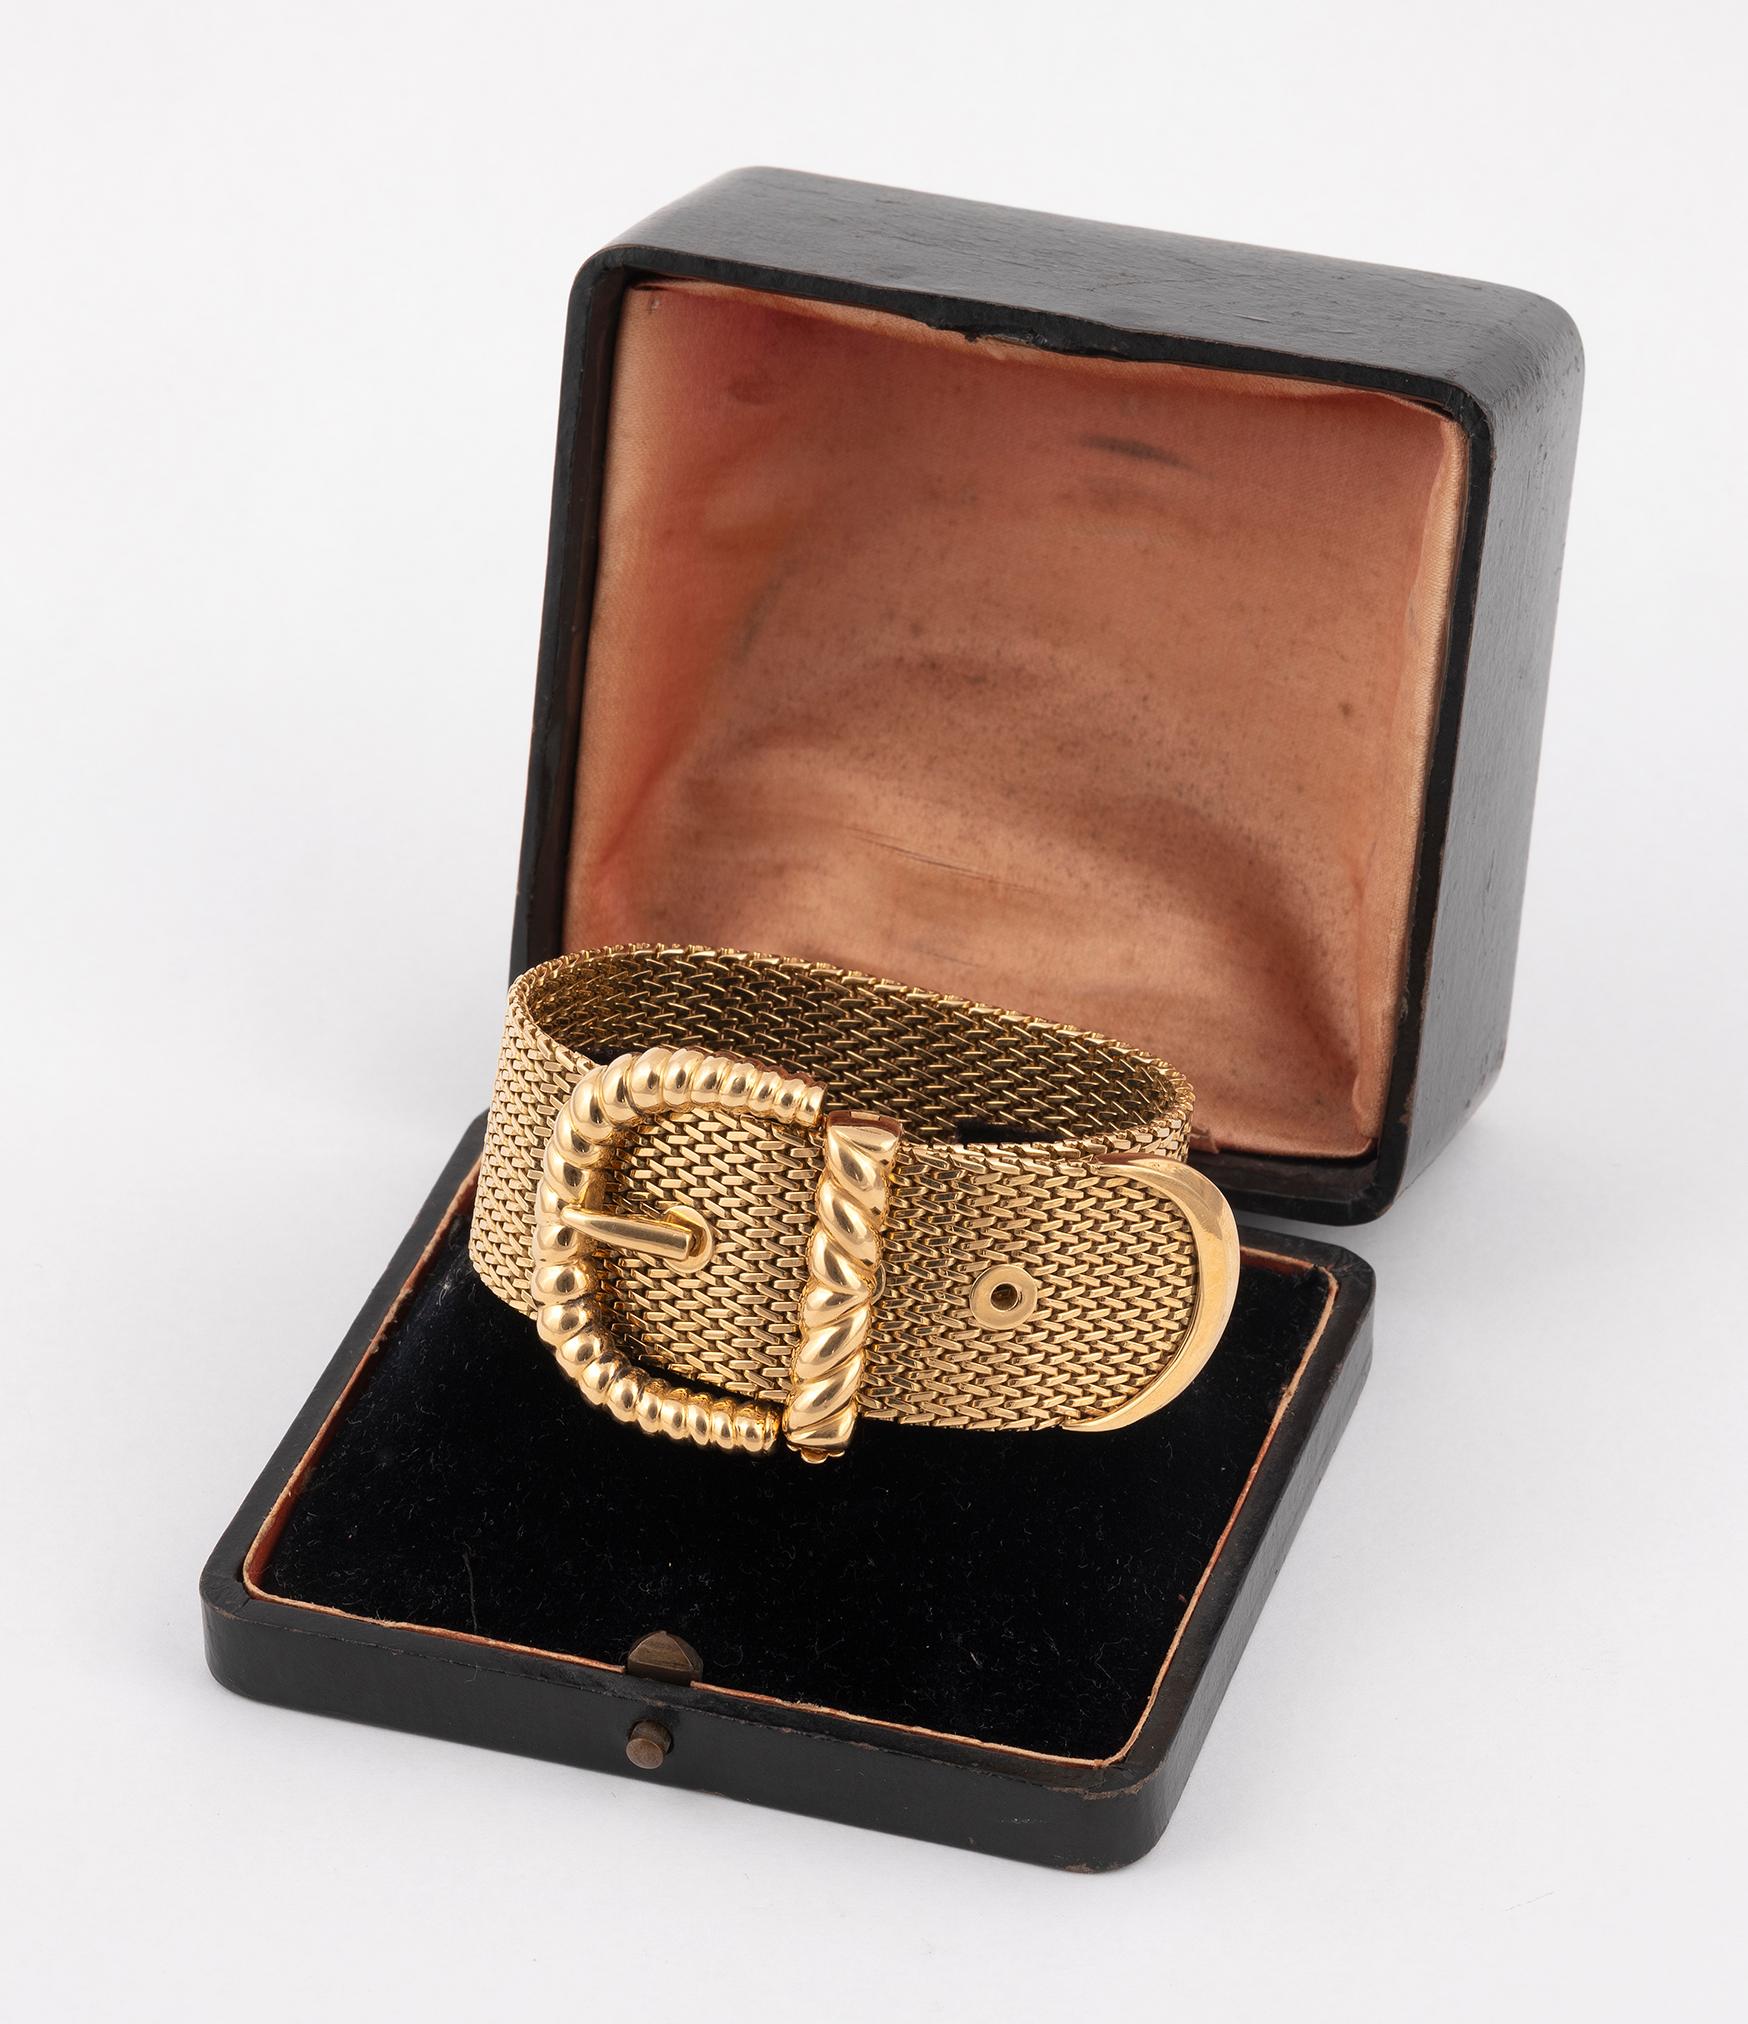 18k yellow gold mesh estate bracelet with clasp.
Size:lenght 19cm wide 2,5cm
Weight: 106.8gr